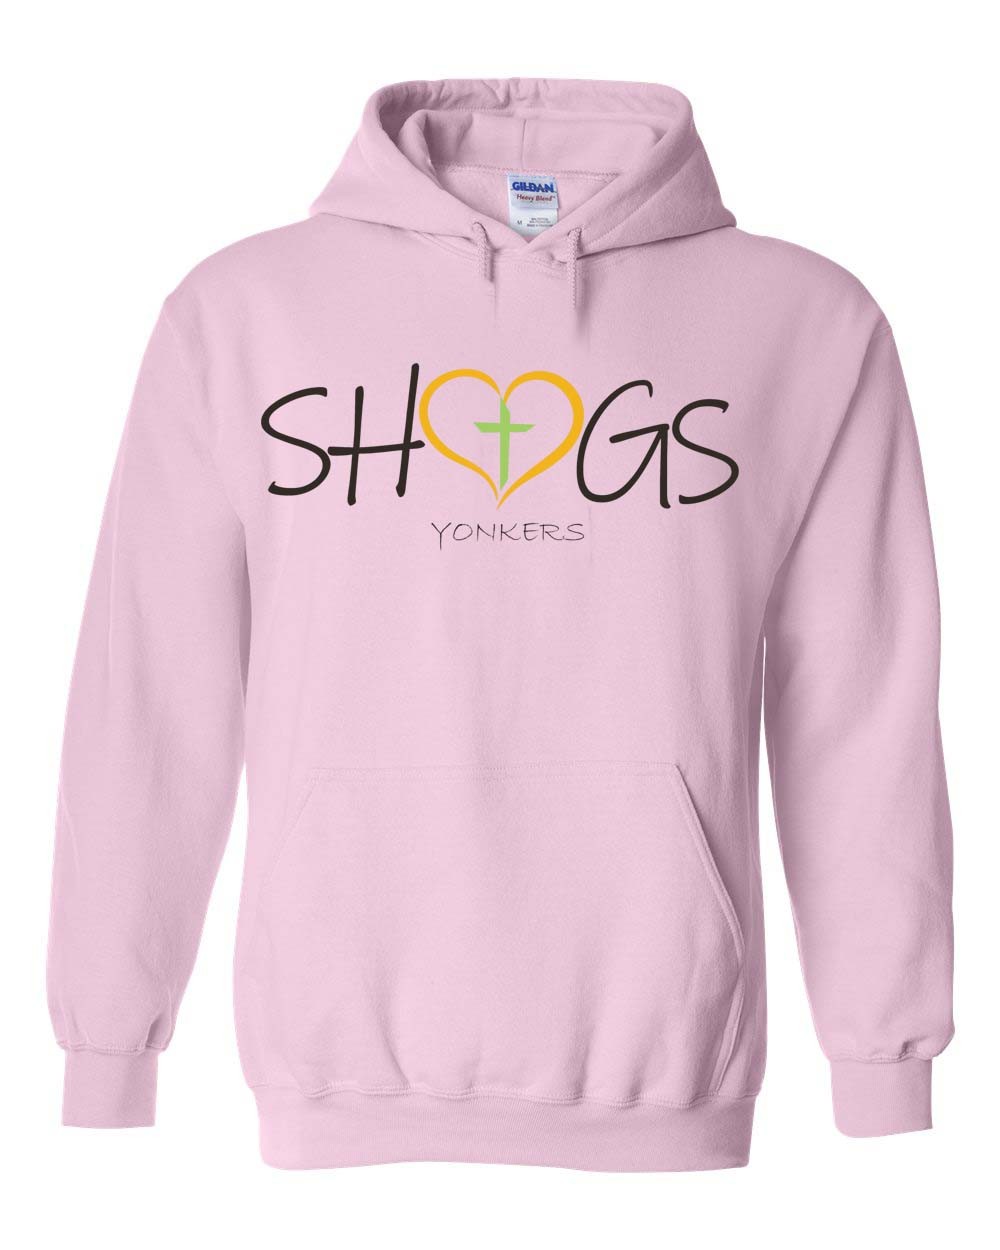 SHGS Spirit Pullover Hoodie w/ Heart Logo - Please Allow 2-3 Weeks for ...